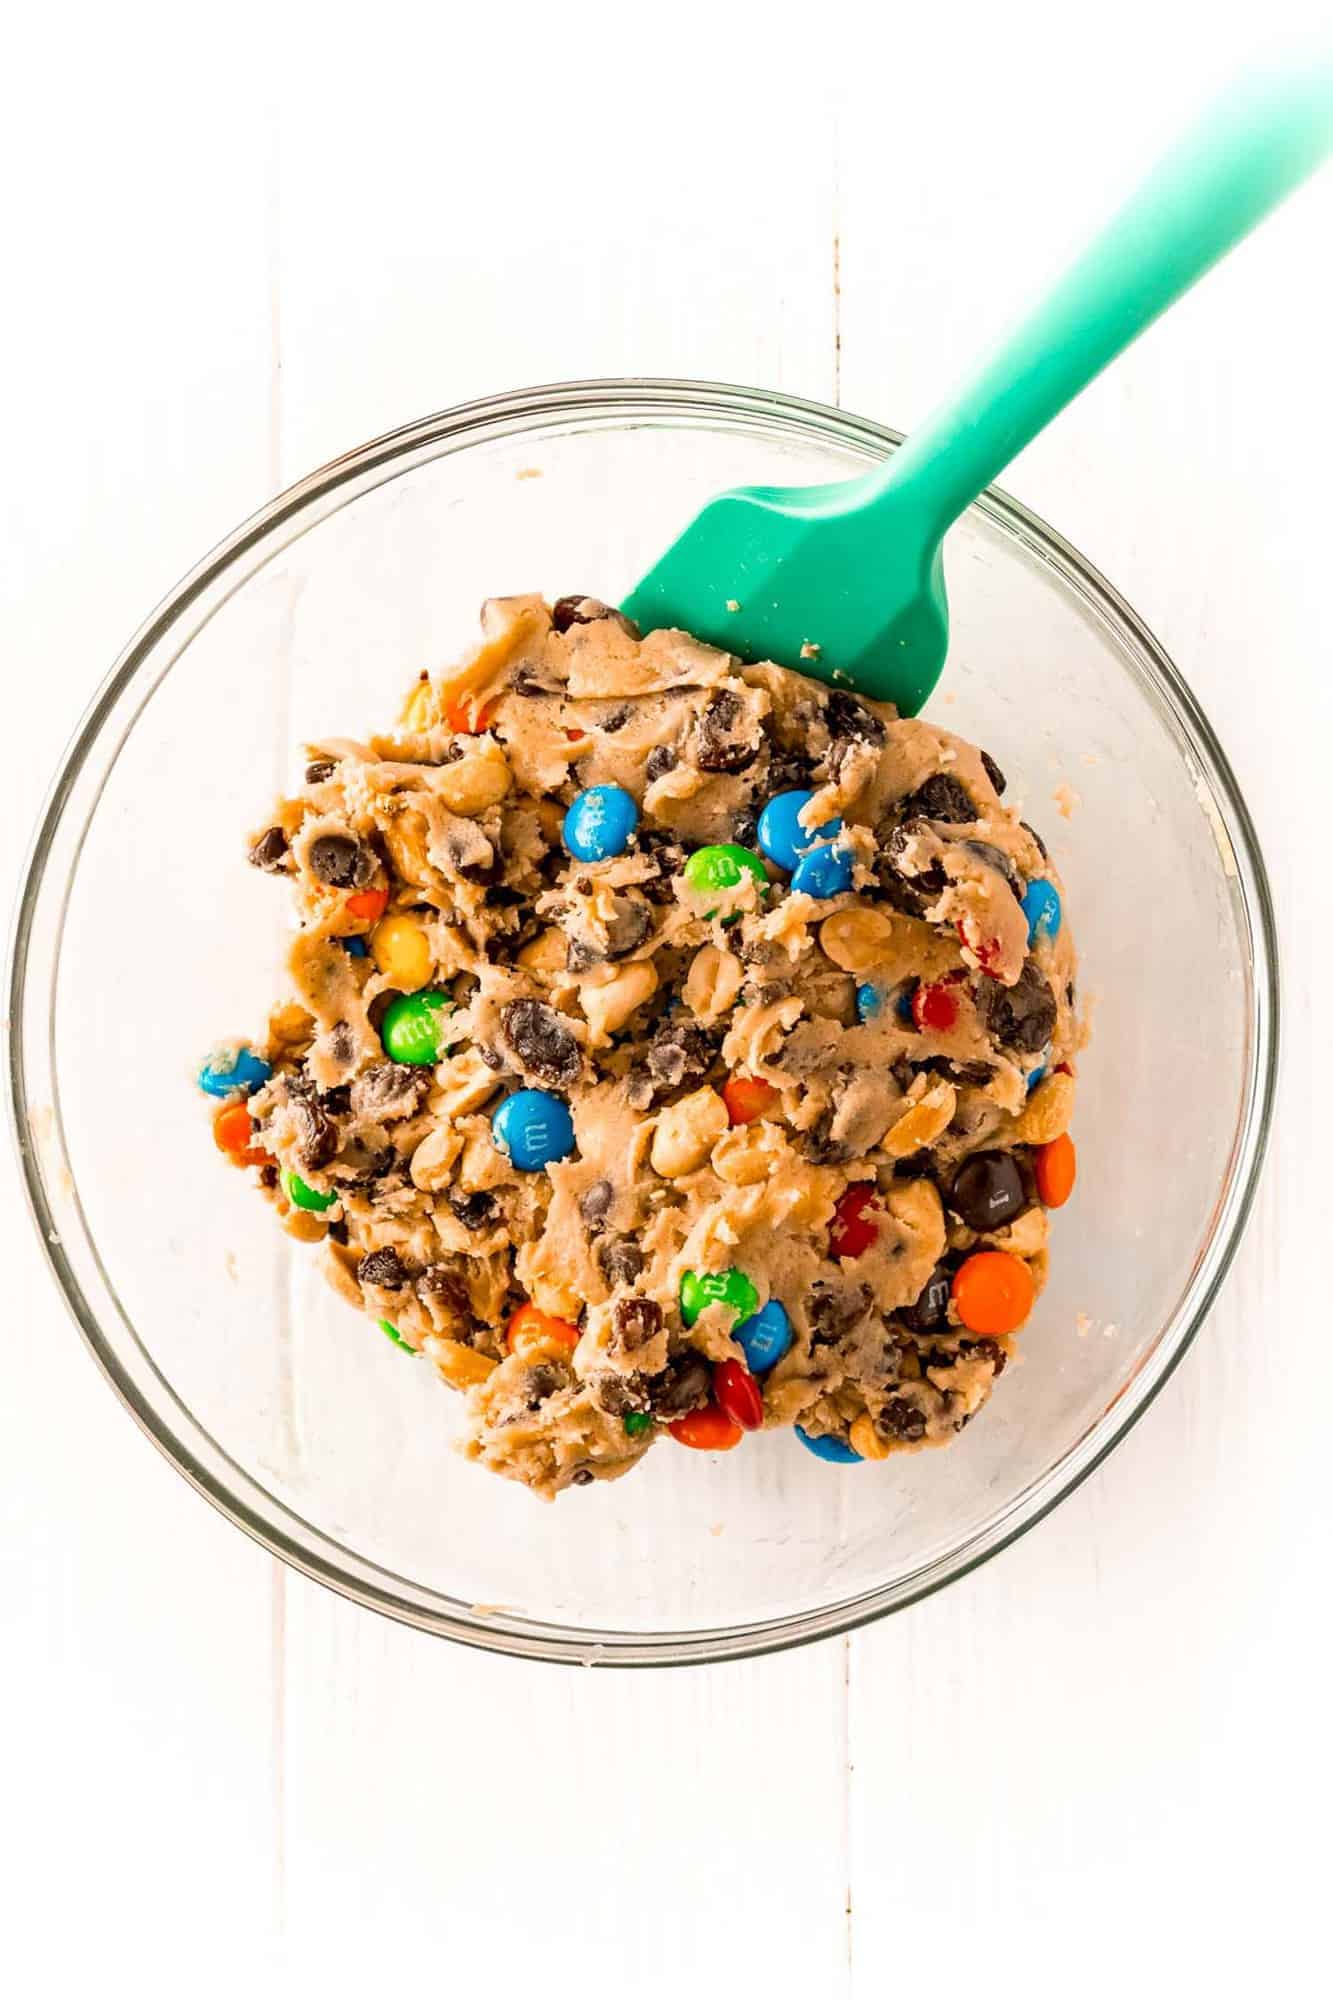 Mixed cookie dough in a glass mixing bowl.